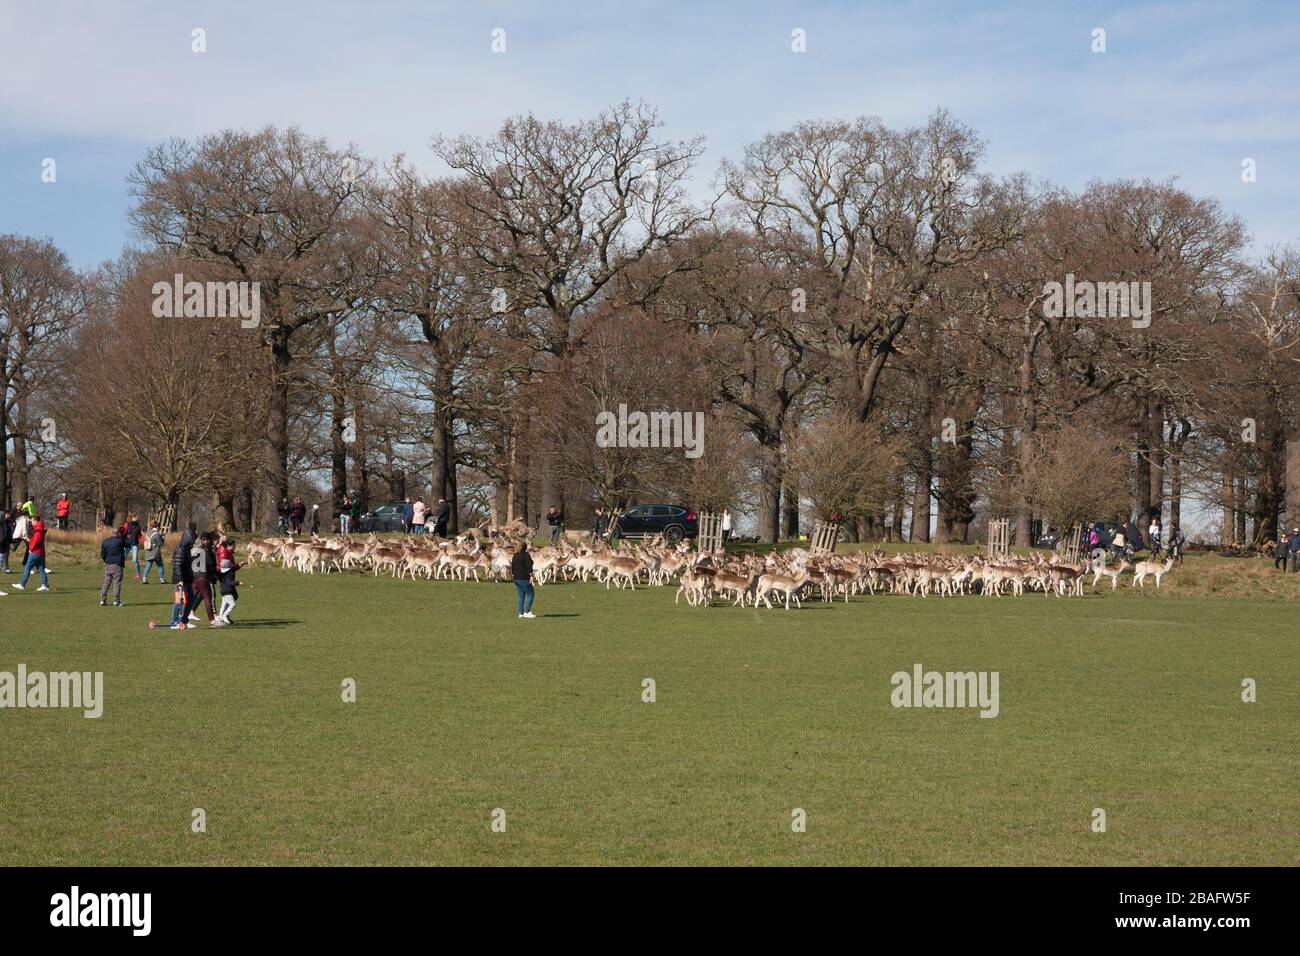 Richmond Park, London, during the coronavirus outbreak 2020, familiies approaching herd of deer on Mothers Day Stock Photo